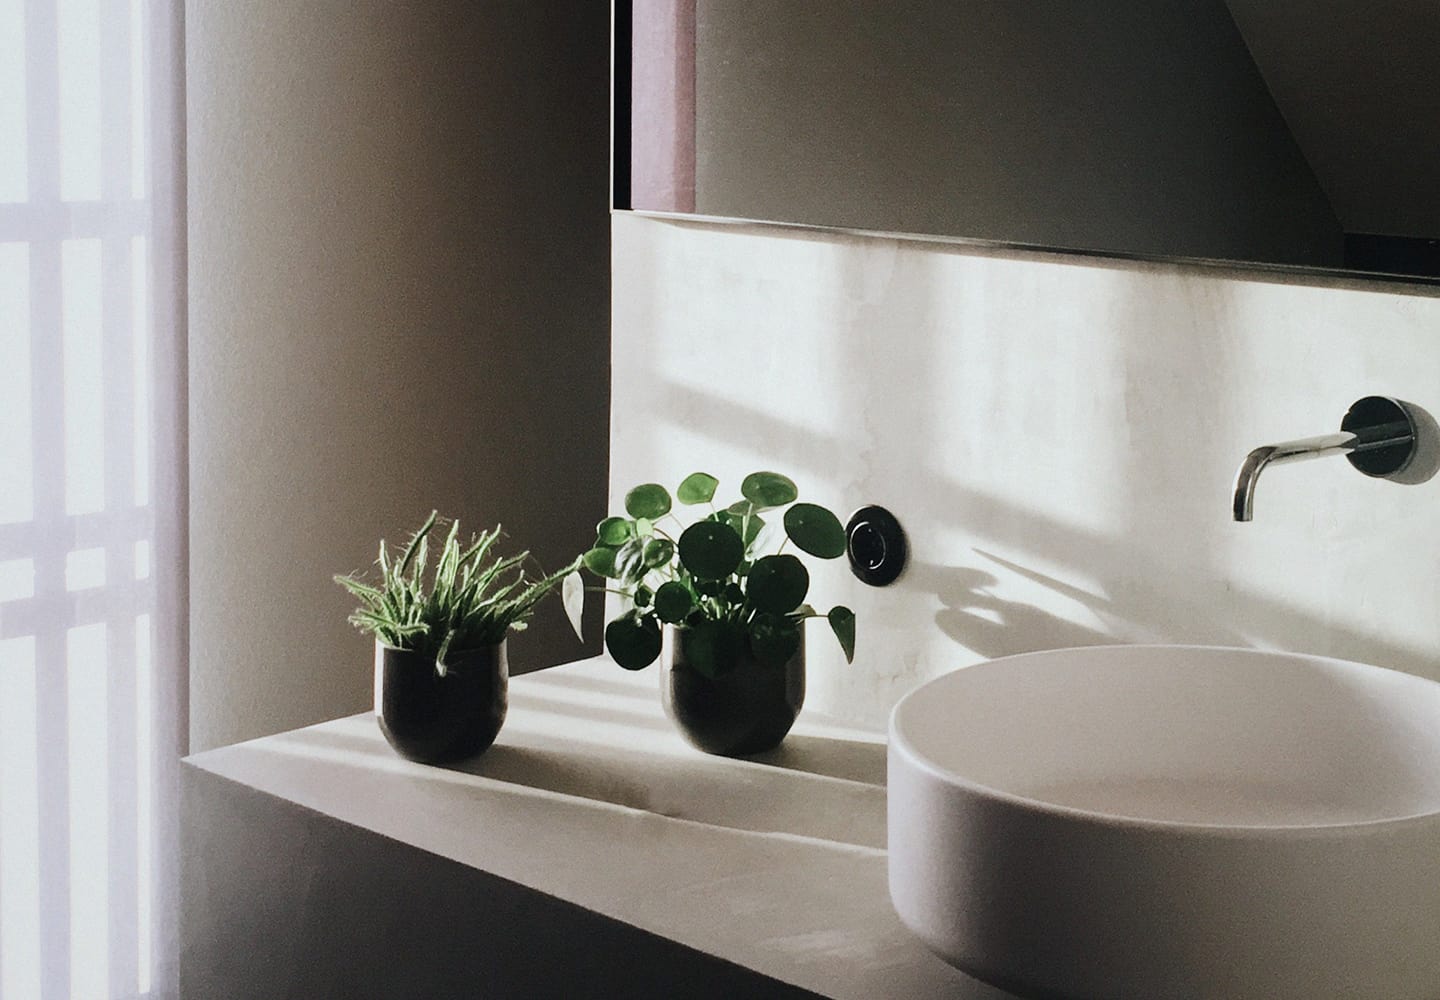 Soft lit bathroom counter and sink featuring small plants